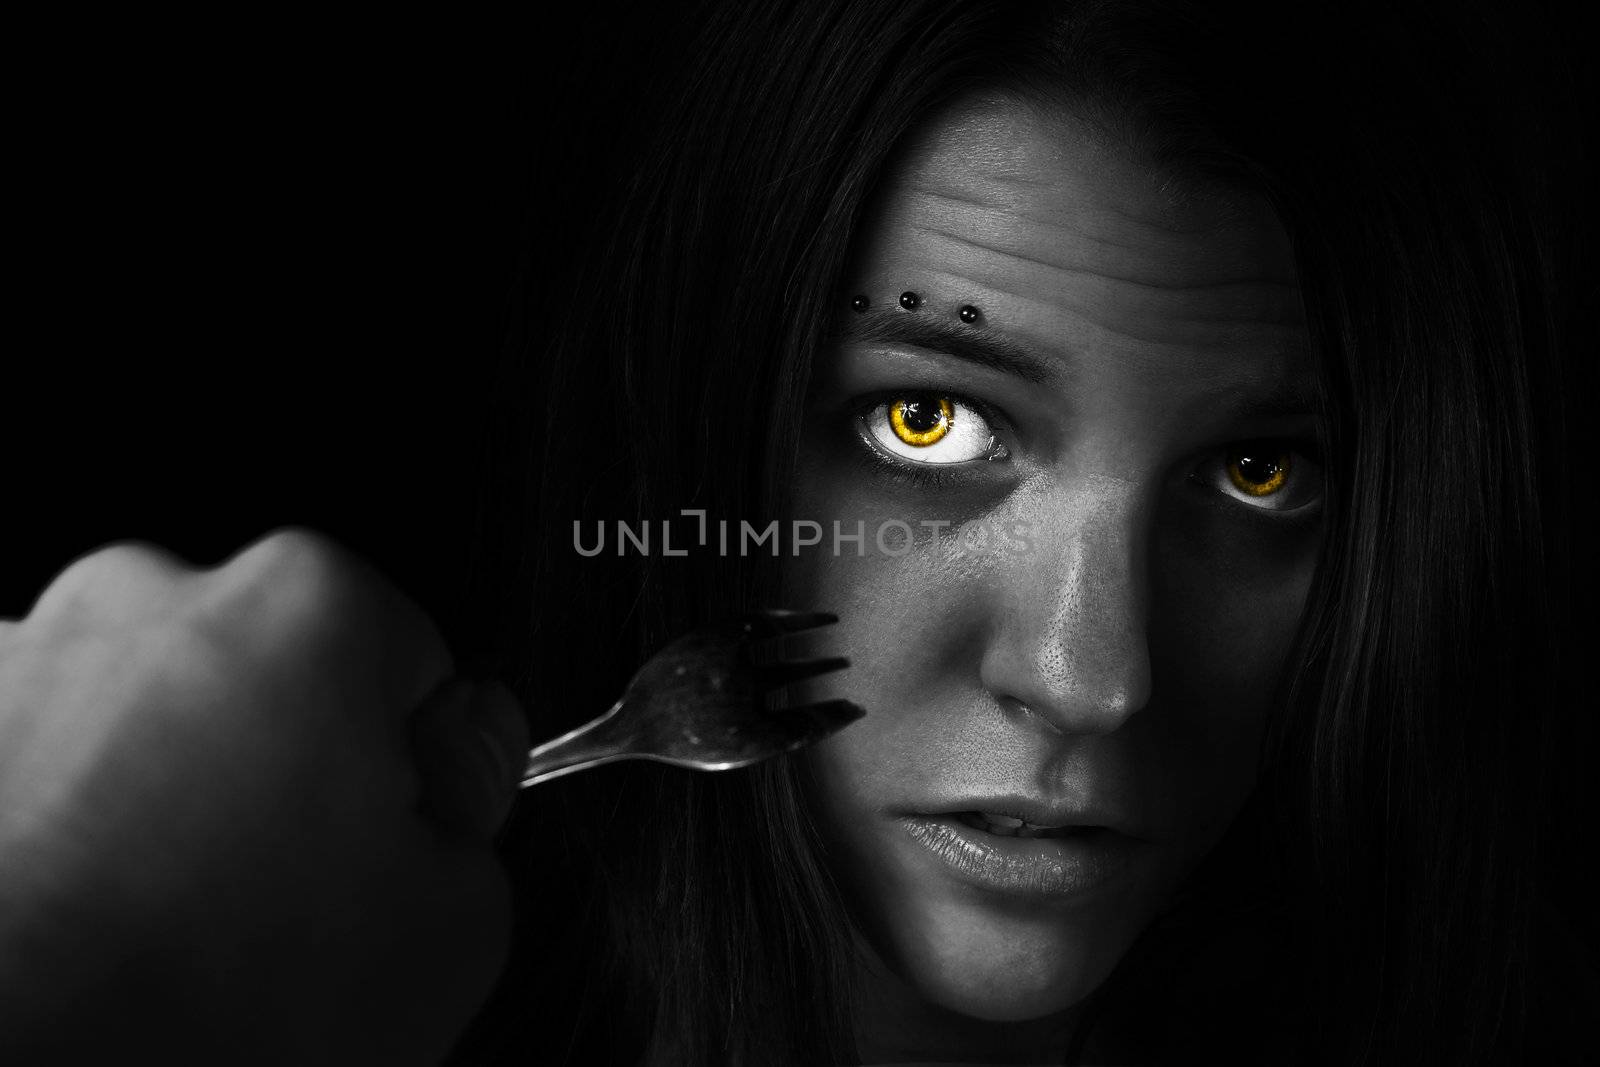 Picture of an intimidated girl. Eating disorders/fork.

Postprocessed with lightpainting in BW.